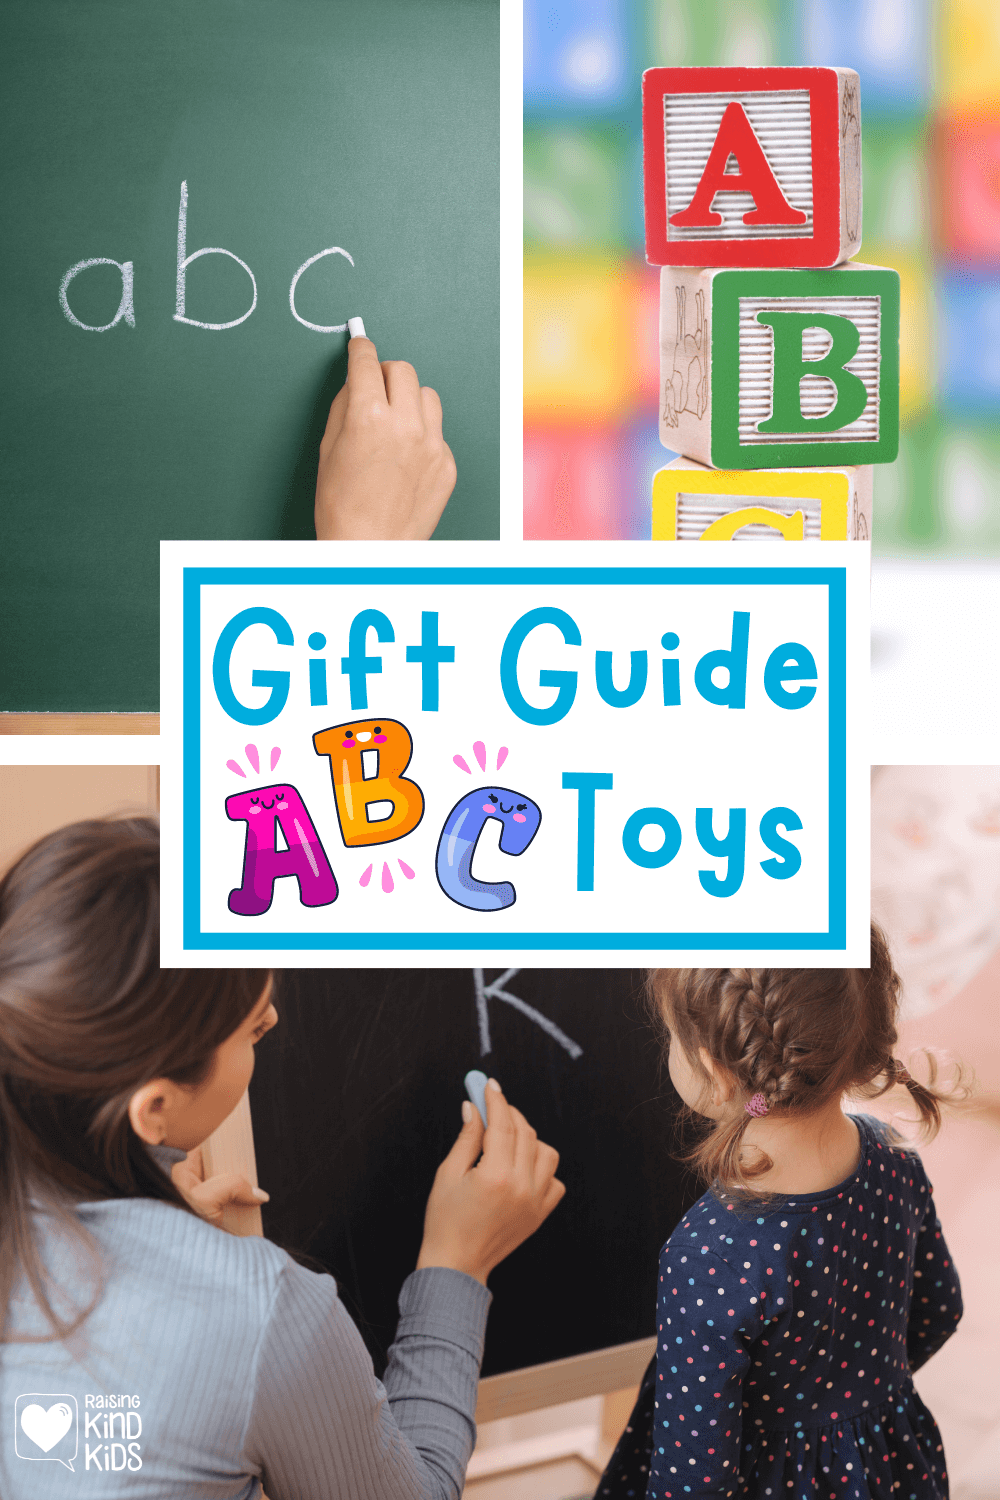 Teach kids the alphabet with these 21 awesome hands on gifts that help kids learn their abcs. #abc #alphabet #learnletters #letterrecognition #knowyourletters #holidaygifts #holidays #gifts #coffeeandcarpool #abcgifts #toddlergifts #preschoolgifts